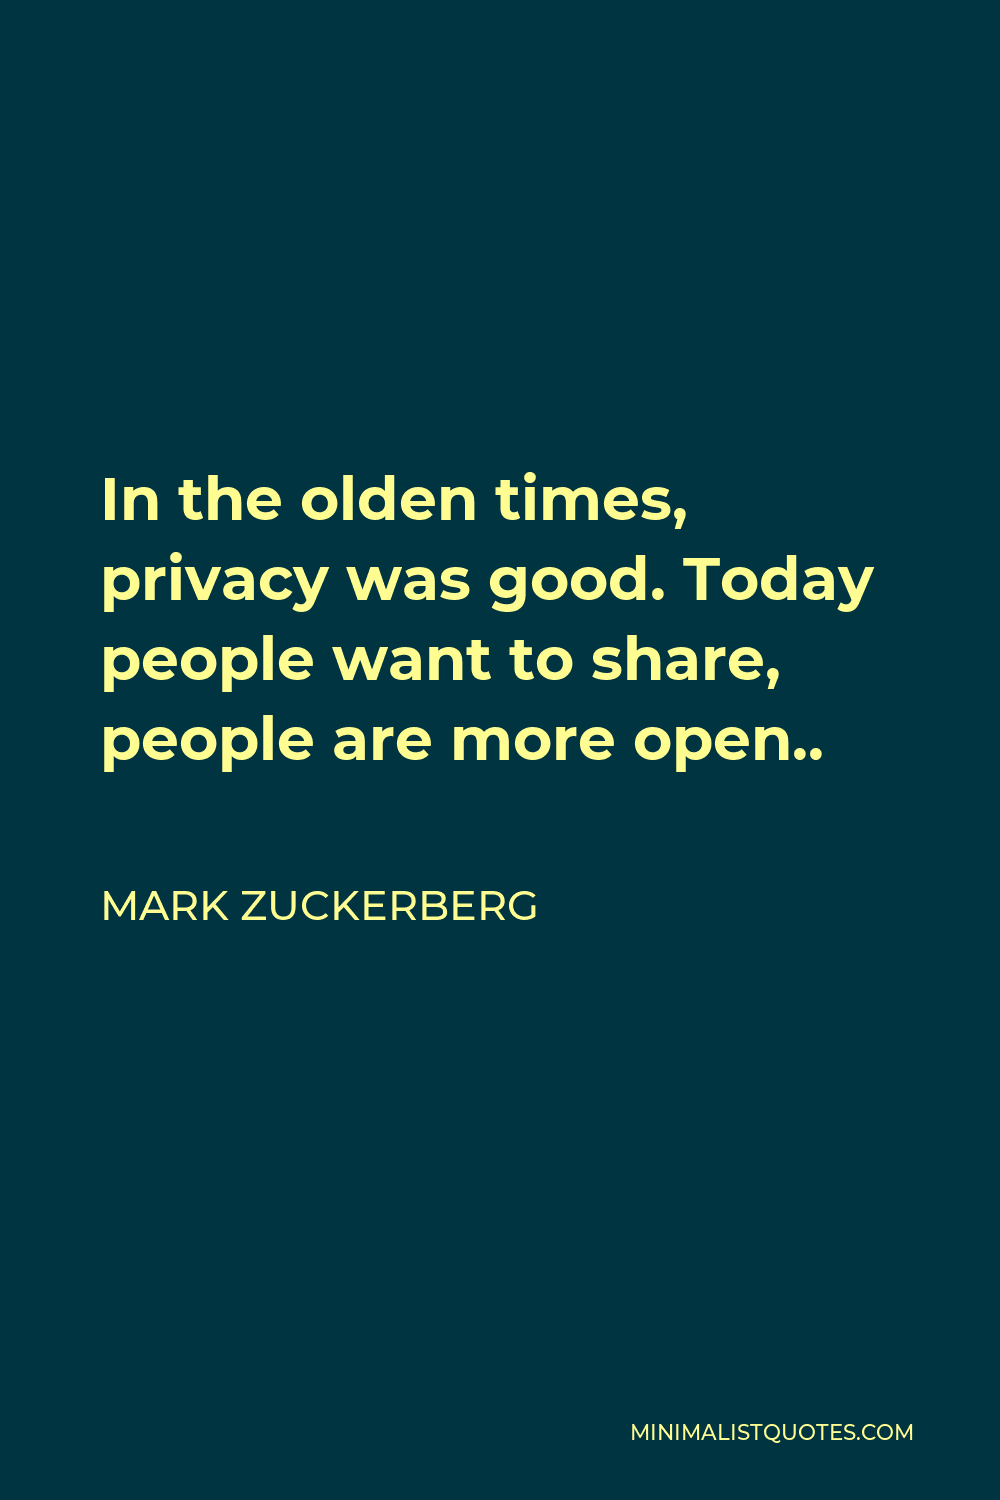 Mark Zuckerberg Quote - In the olden times, privacy was good. Today people want to share, people are more open..